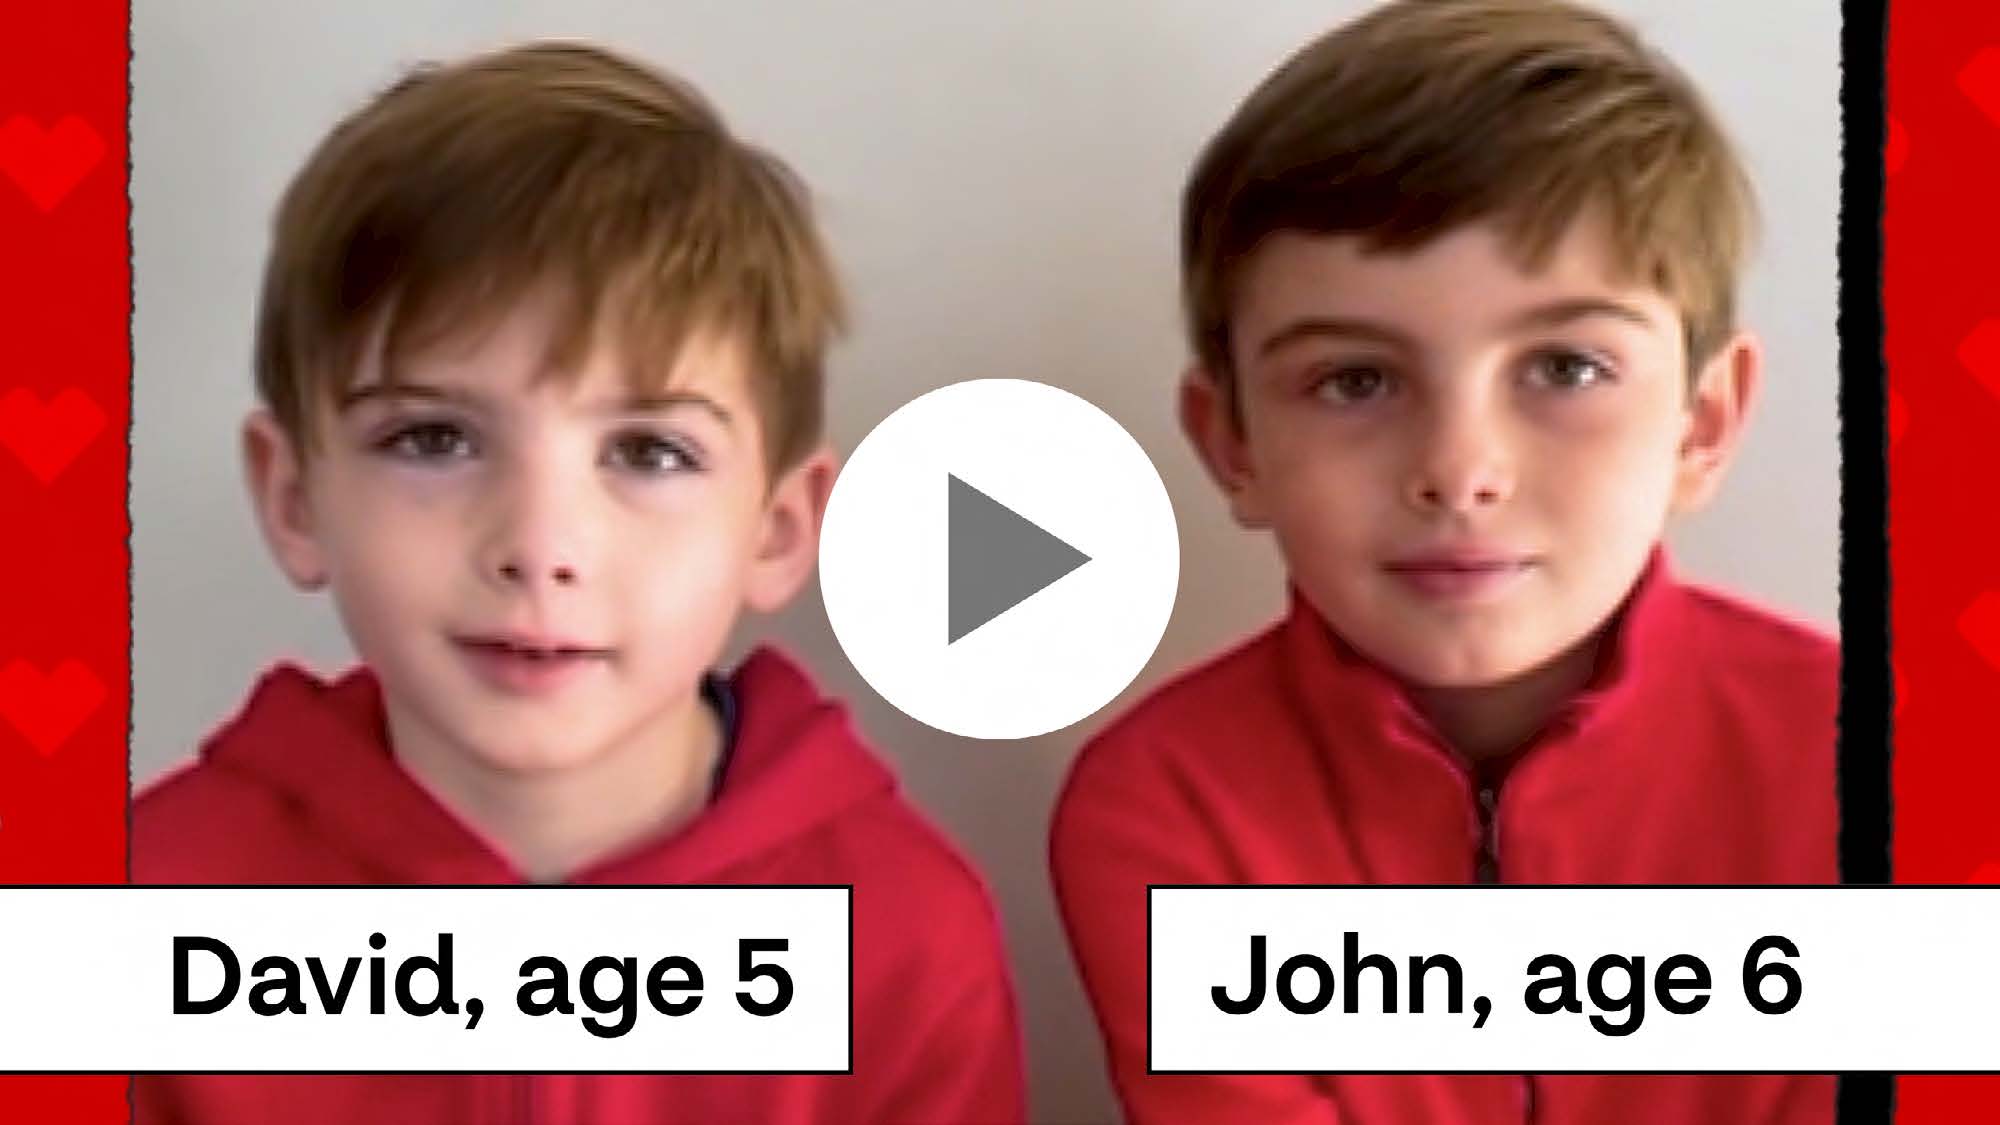 Play video of David, age 5, John, age 6, asking “Can we get our shots together?”